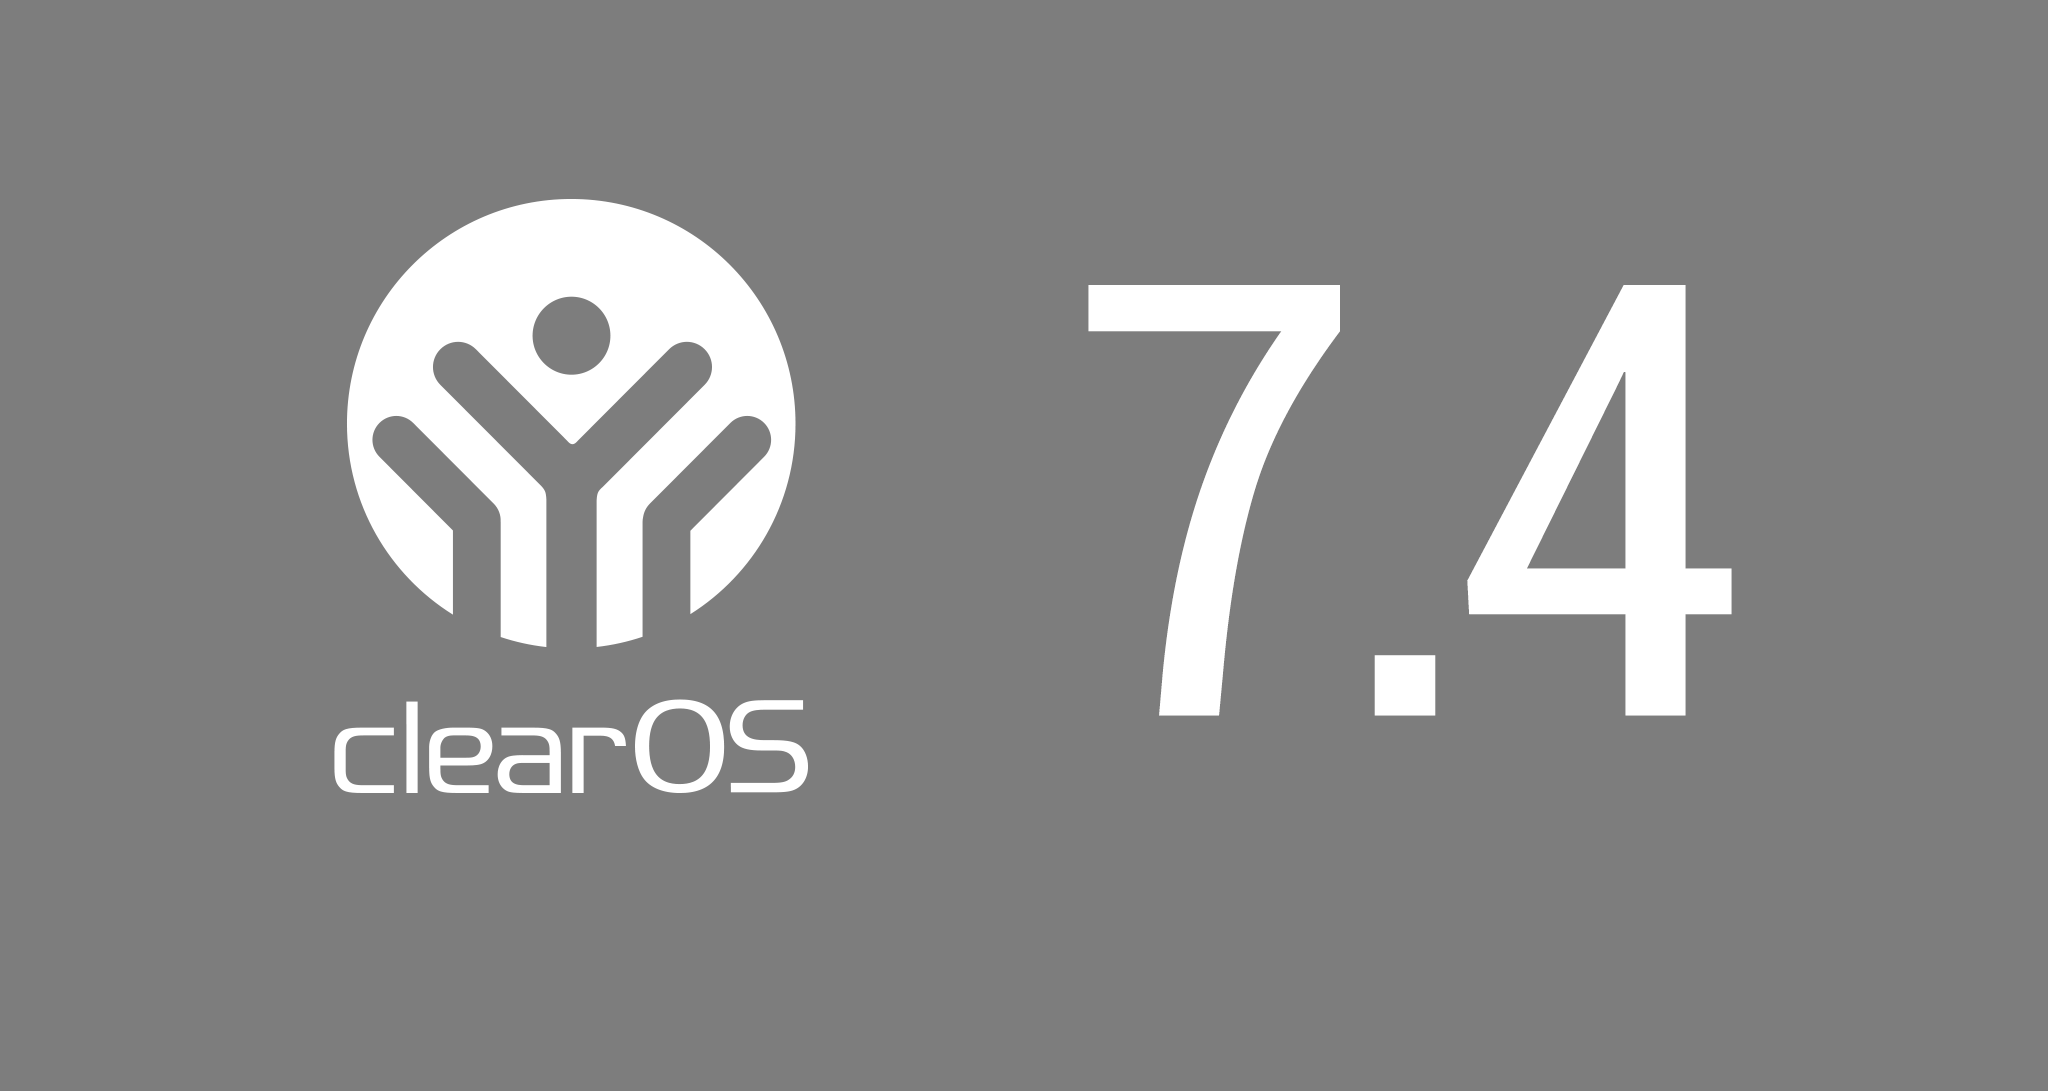 ClearOS Version 7.4 Now Available to Community Edition Users